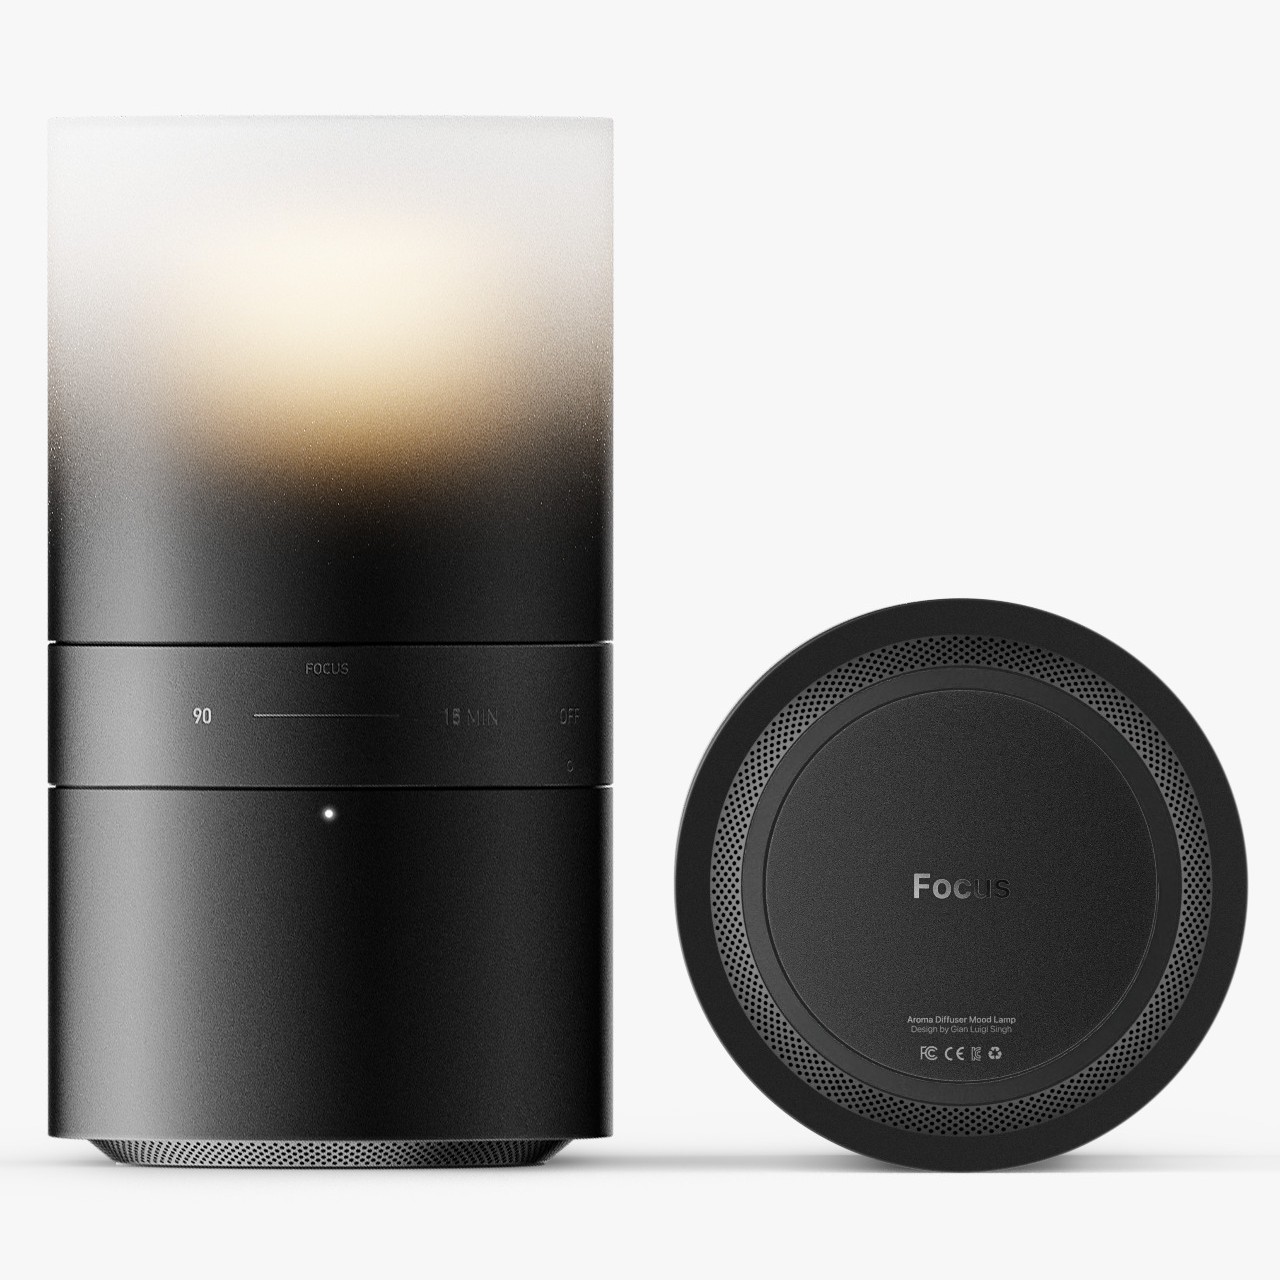 This aroma diffuser and mood lamp in one has a trick to help you stay focused